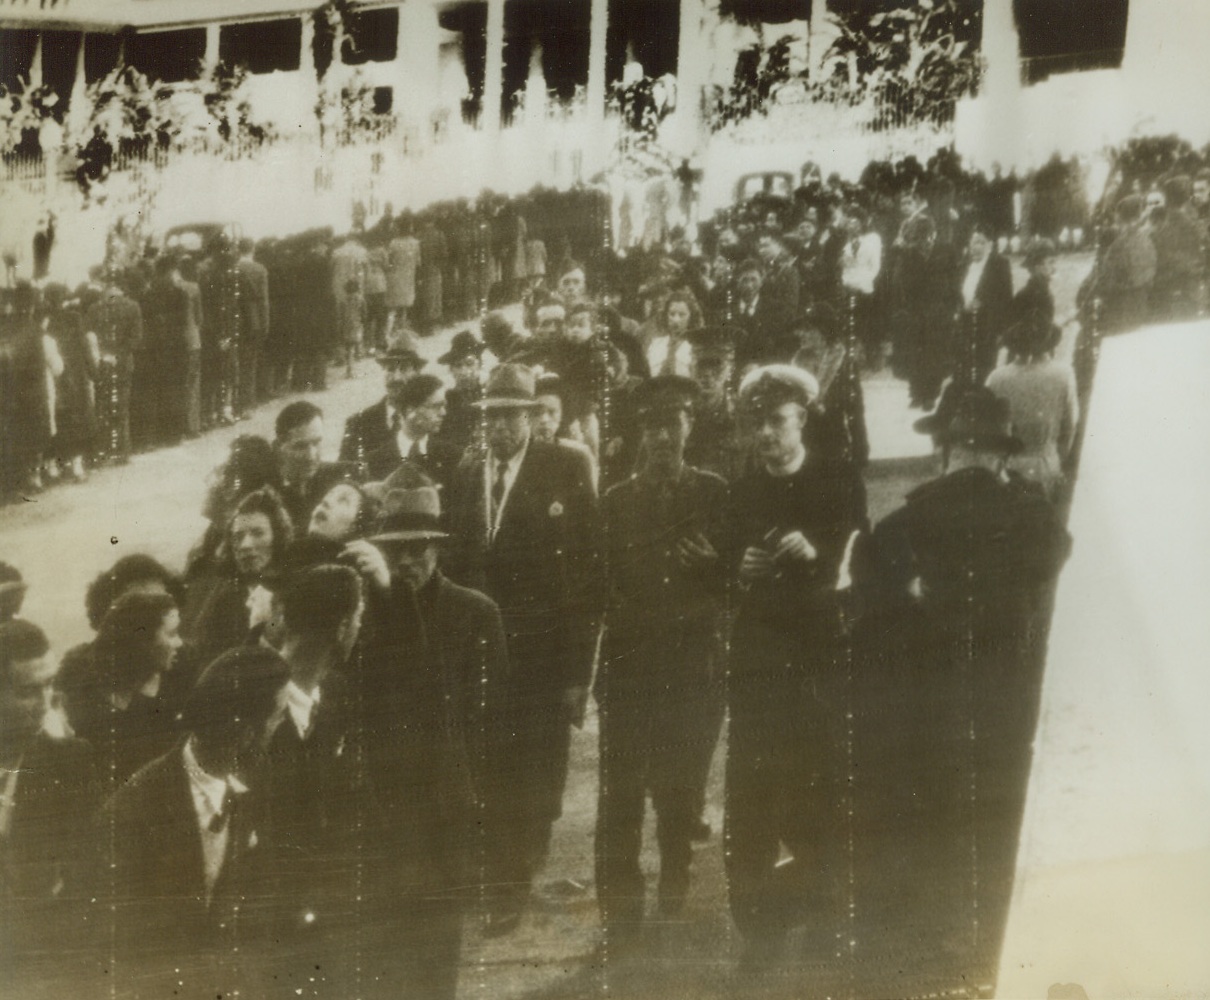 Paying Last Respects to Dablan, 12/28/1942. Algiers—Closely packed civilians file past the bier where Admiral Jean Francois Dablan lies in state, in Algiers. The slain French chief might have caused mistrust in some parts of the world, but this photo is testimony that he was popular in French Colonial America. His bier may be seen in the distant background between the double-lines of visitors. Credit: ACME radiophoto;